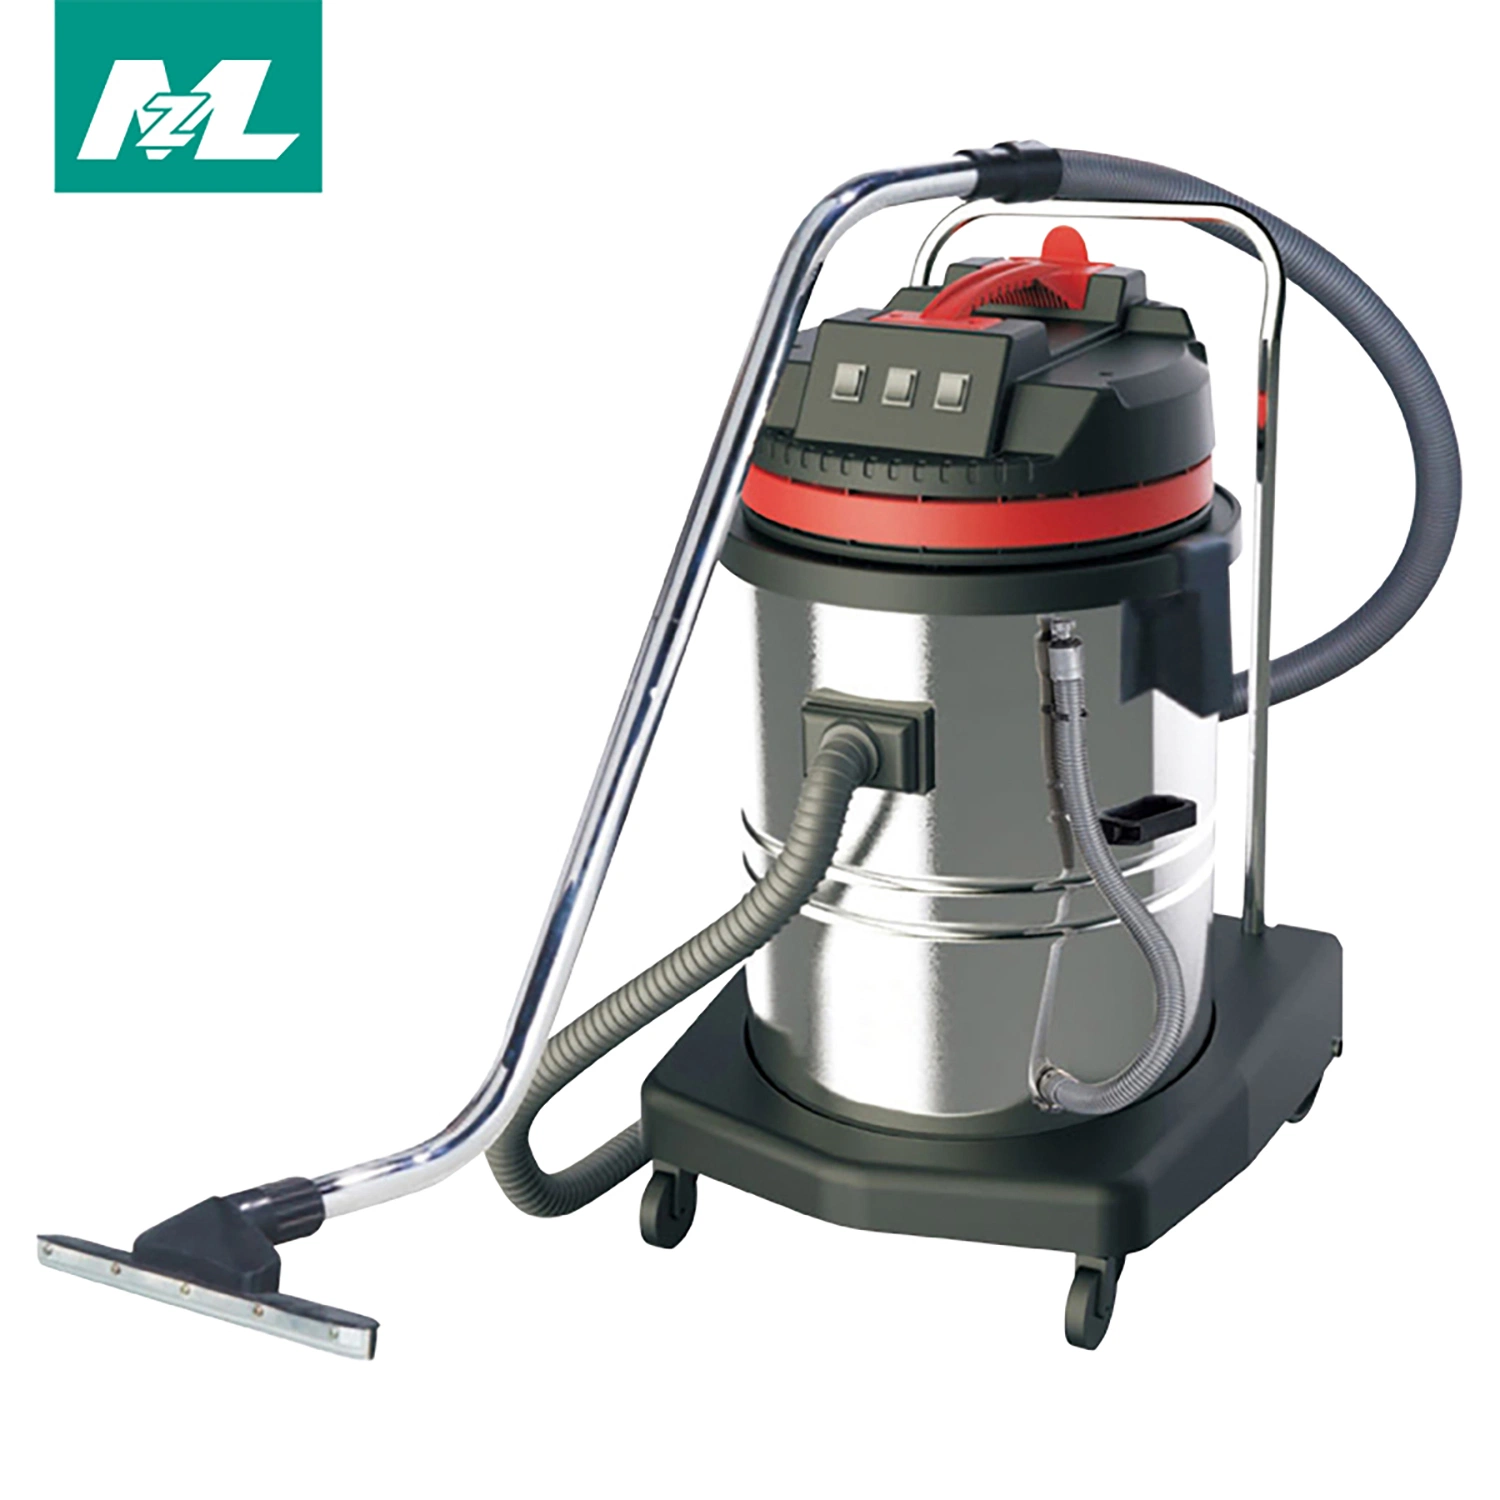 3000W Stainless Steel Industrial Vacuum Cleaner Carpet Cleaning Machine